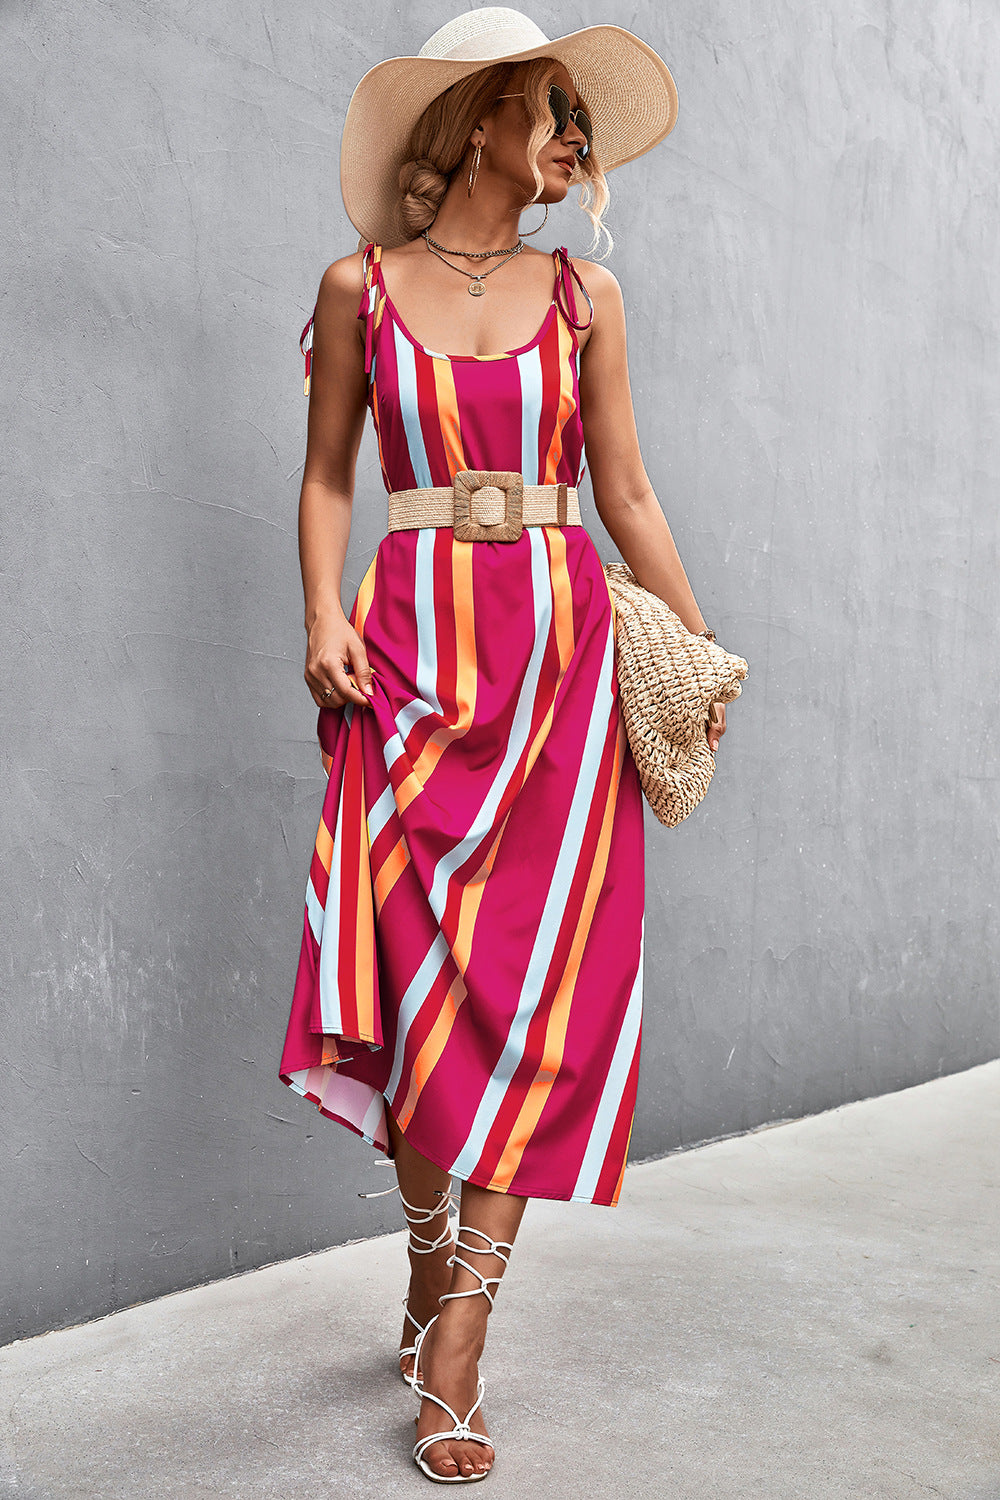 Sexy Backless Striped Long Sleeveless Dresses